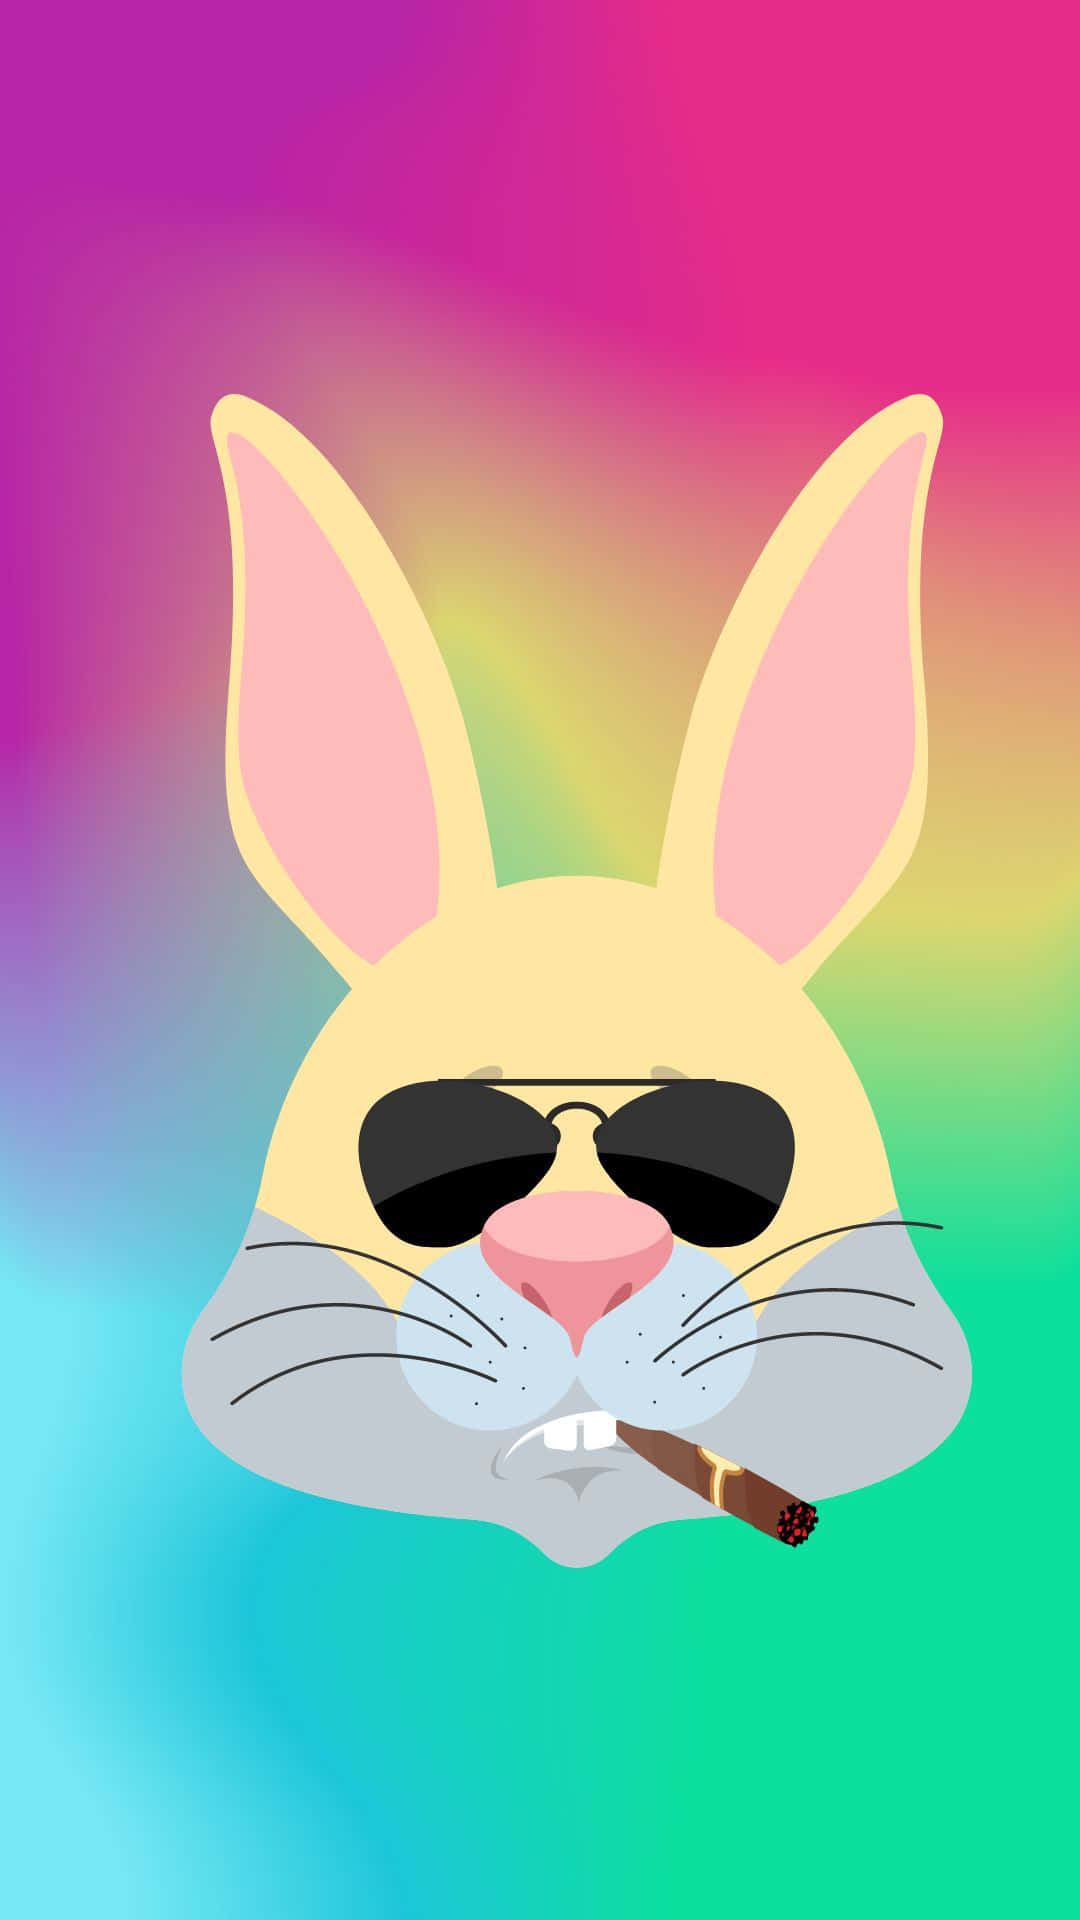 A Rabbit Wearing Sunglasses And Smoking A Cigarette On A Colorful Background Background